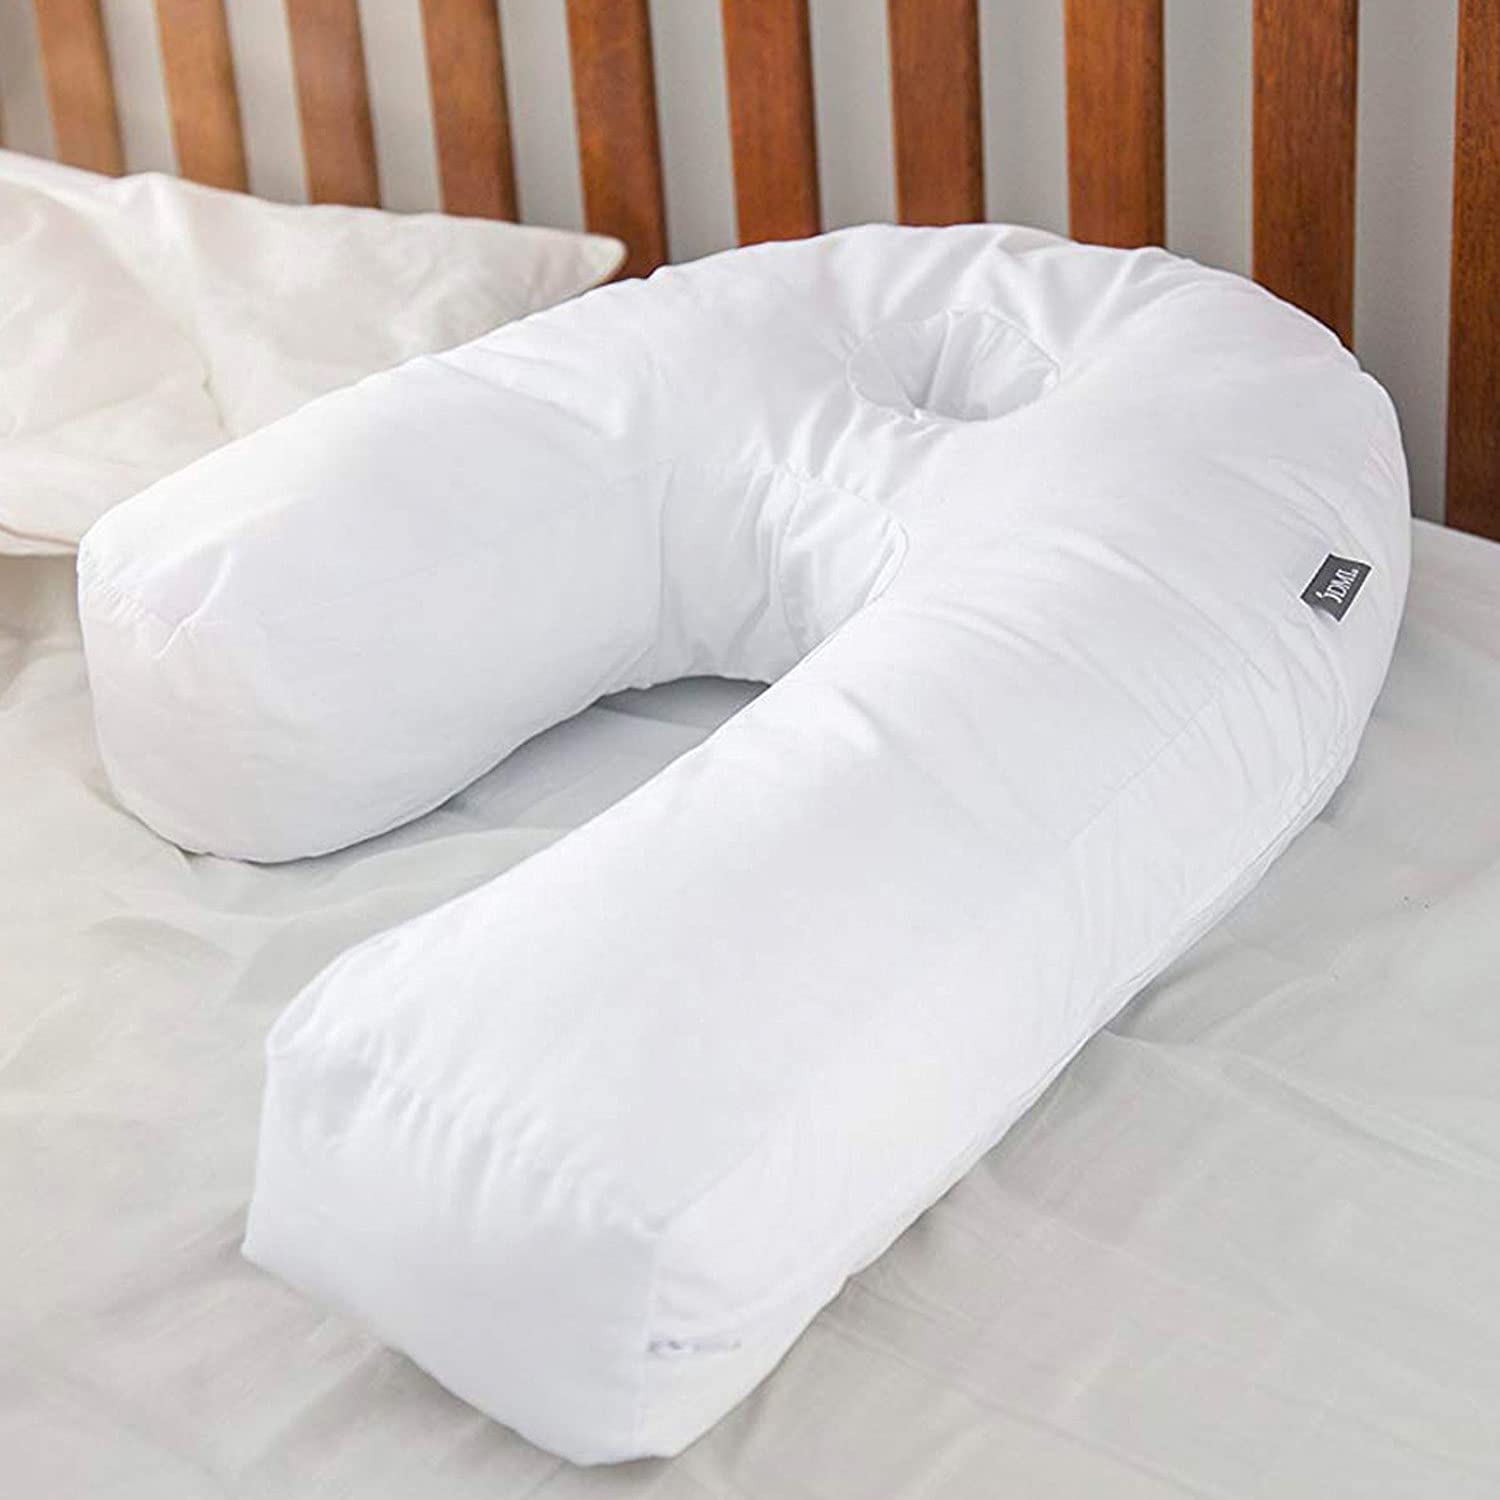 DMI Body Pillow, Side Sleeper Pillow and Pregnancy Pillow with Contoured Support for Neck, Back, Hip, Joint Pain and Sciatica Relief with Removable Washable Cover, Full, White, 1 Count (Pack of 1)